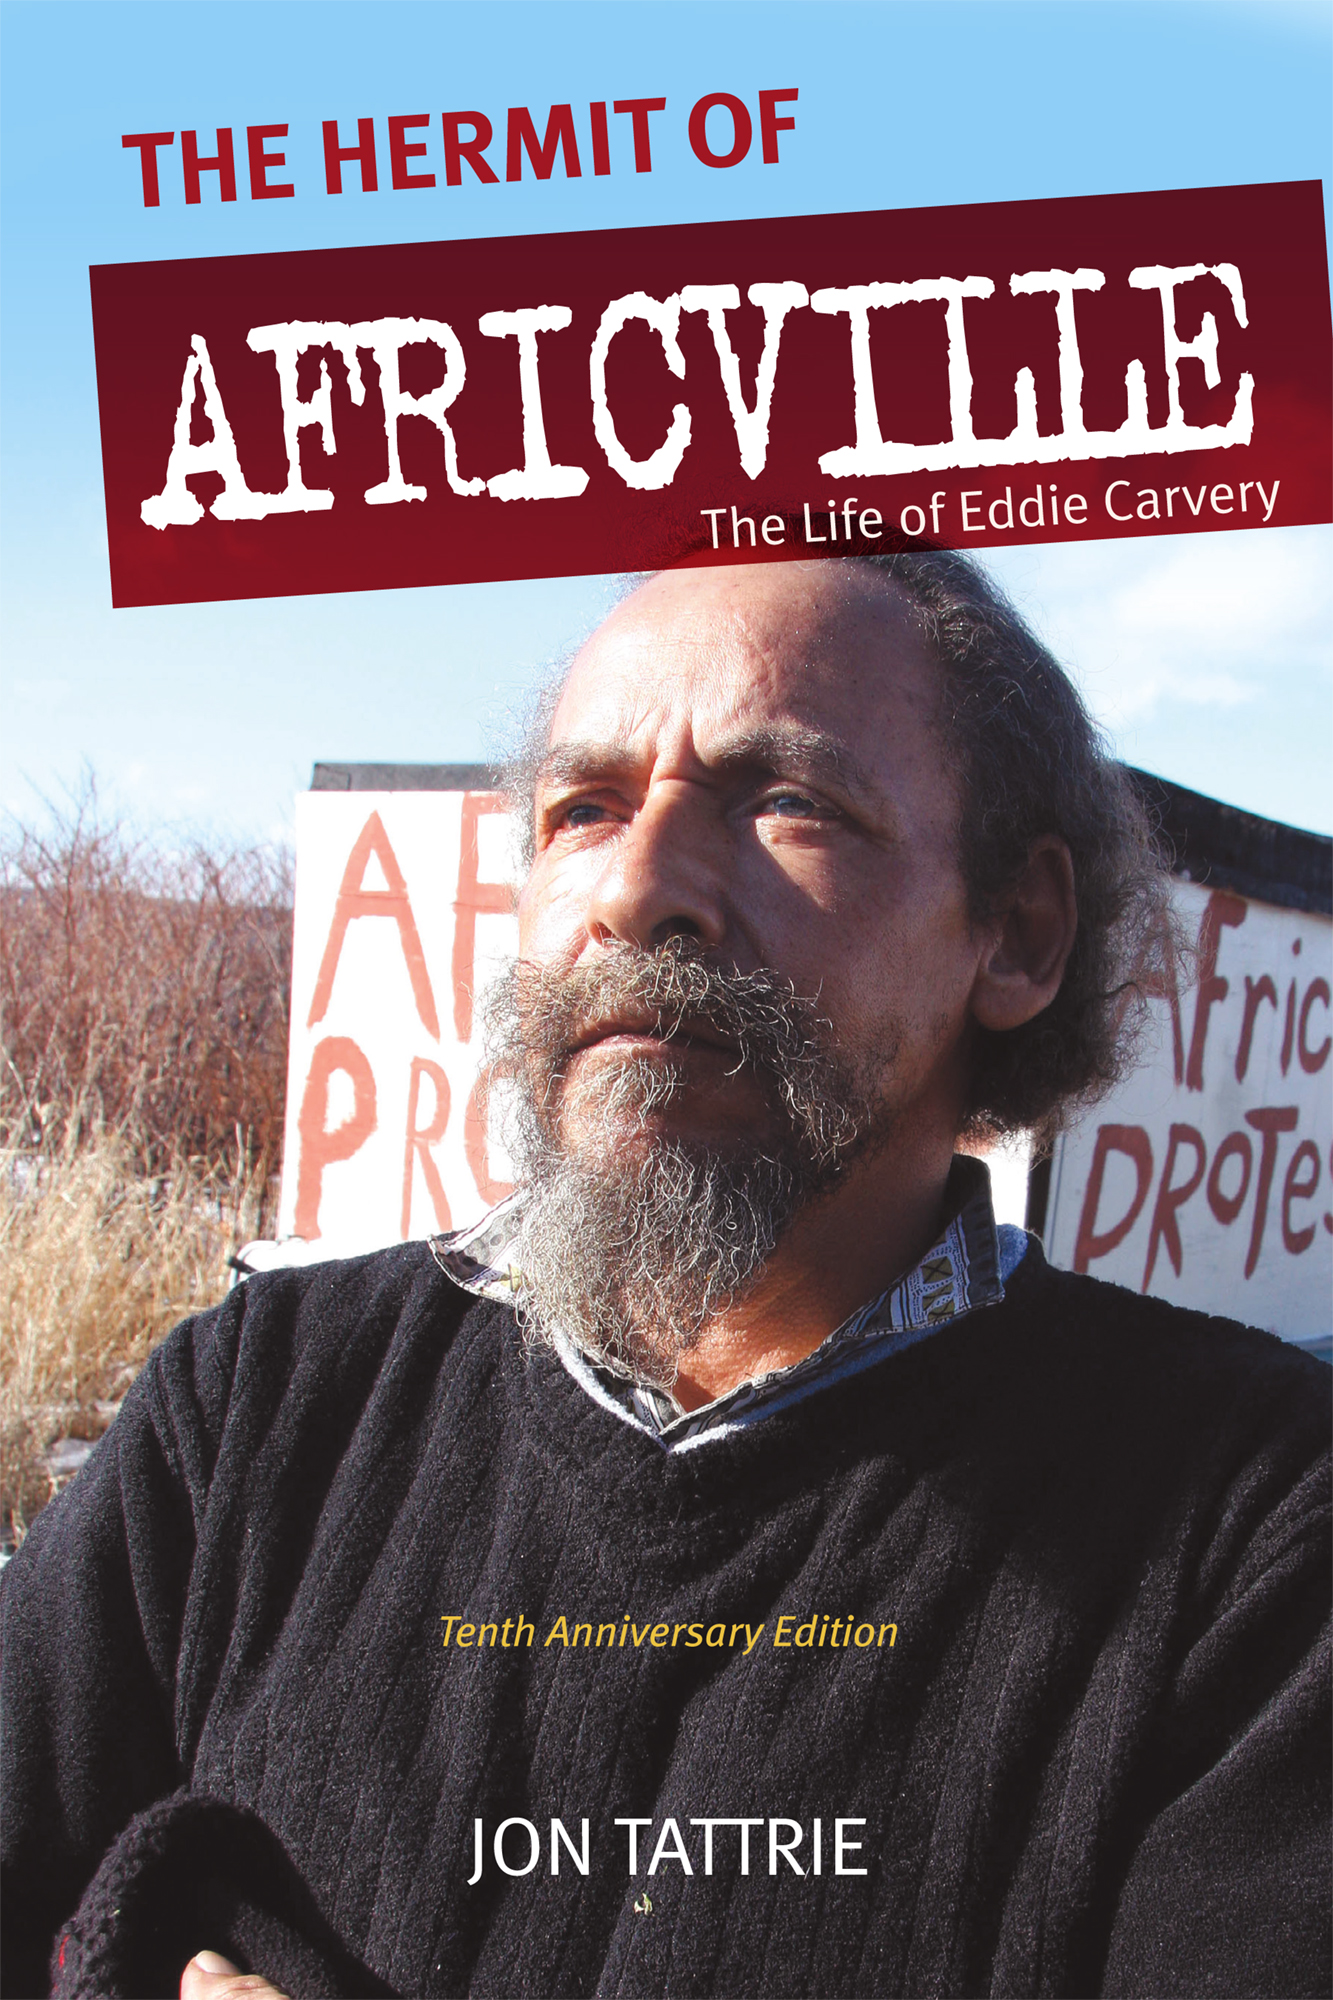 The Hermit of Africville